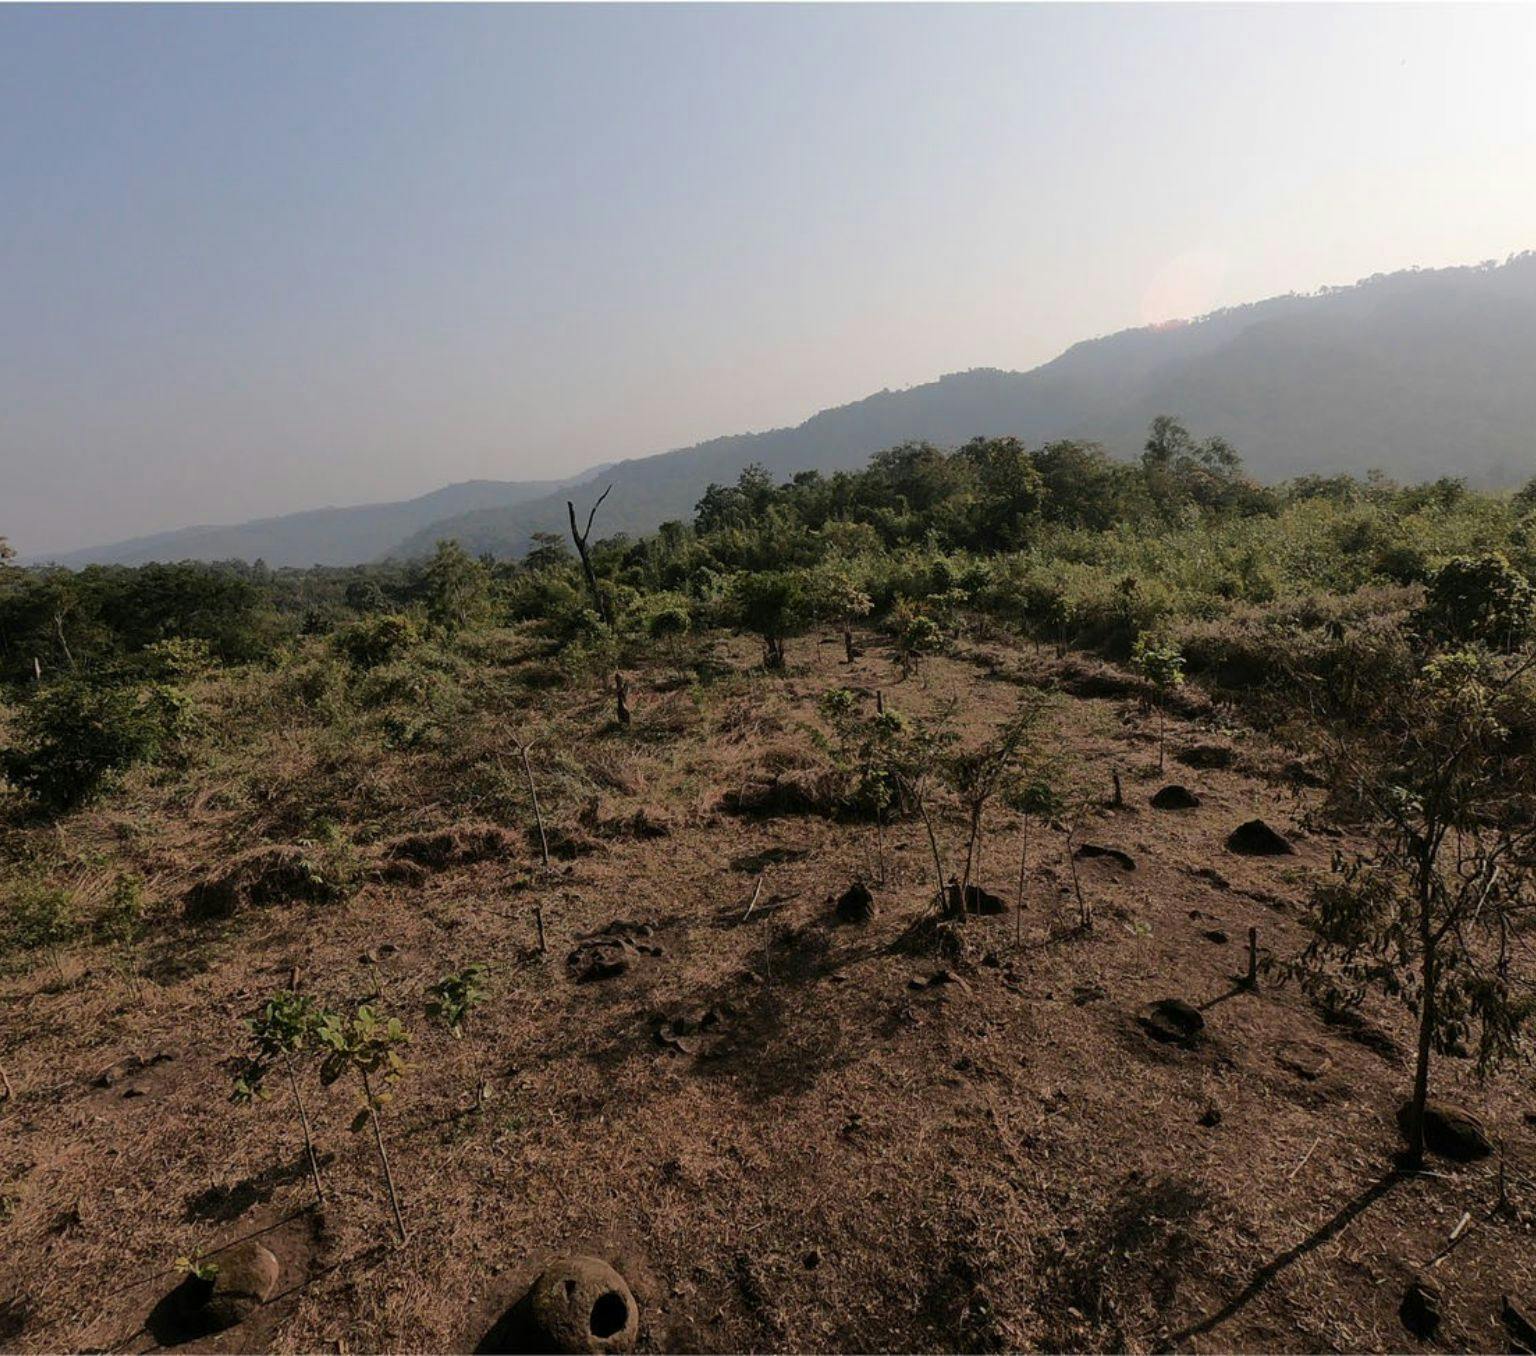 Landscape of a site in India